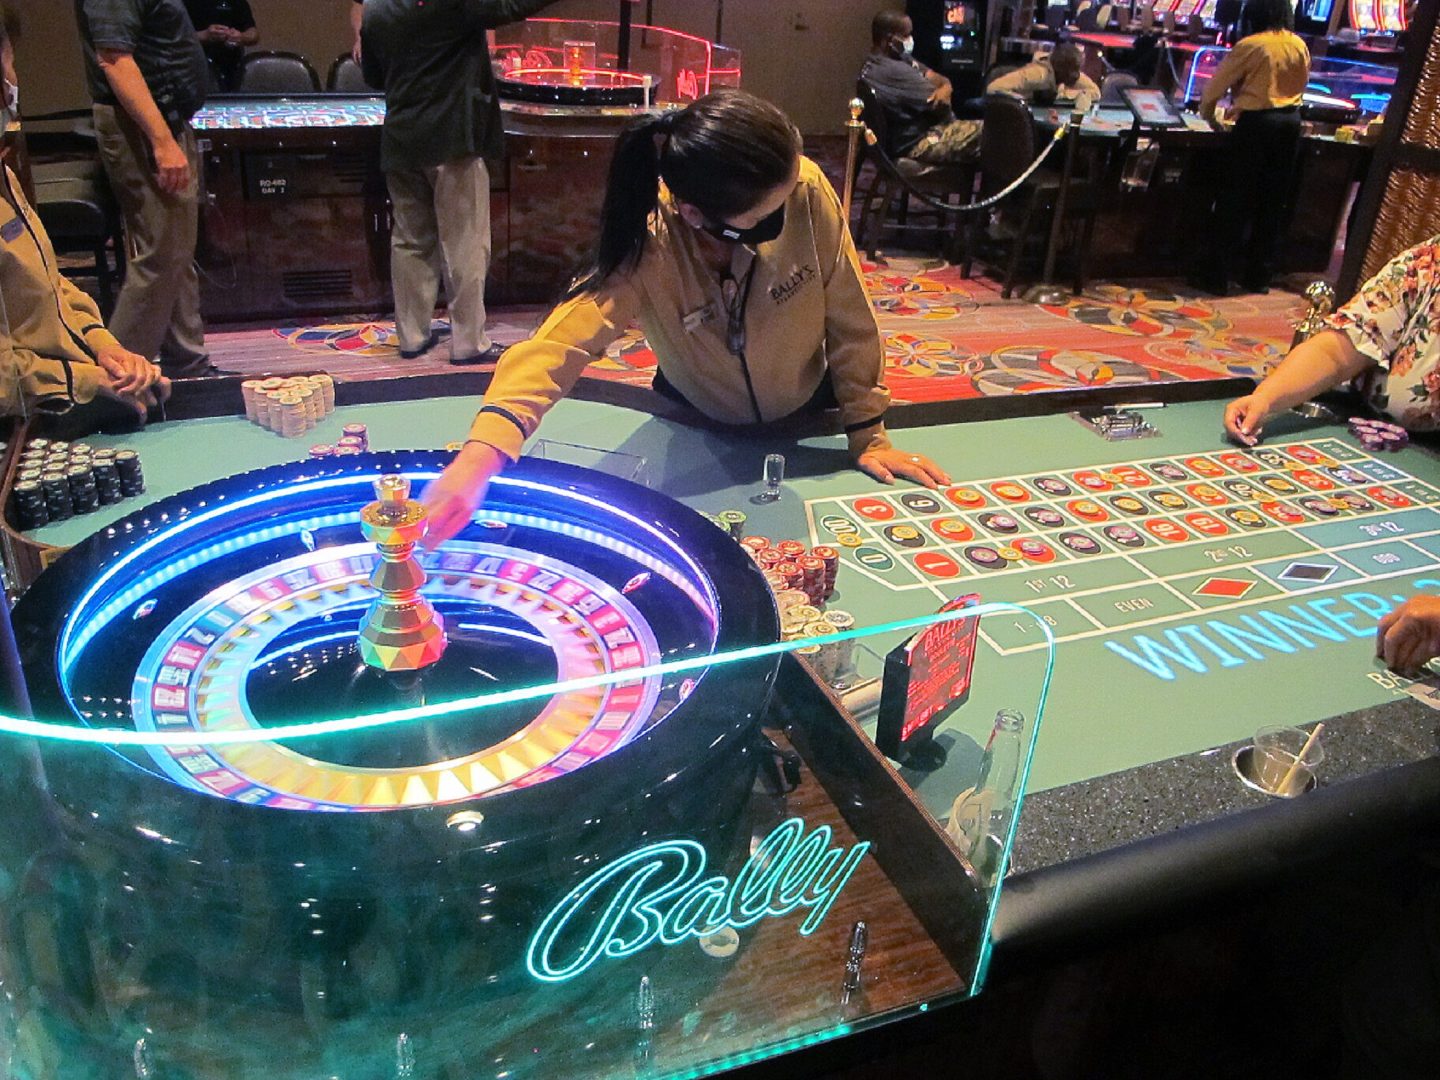 Casinos have best quarter ever; 2020 total exceeded already | WITF